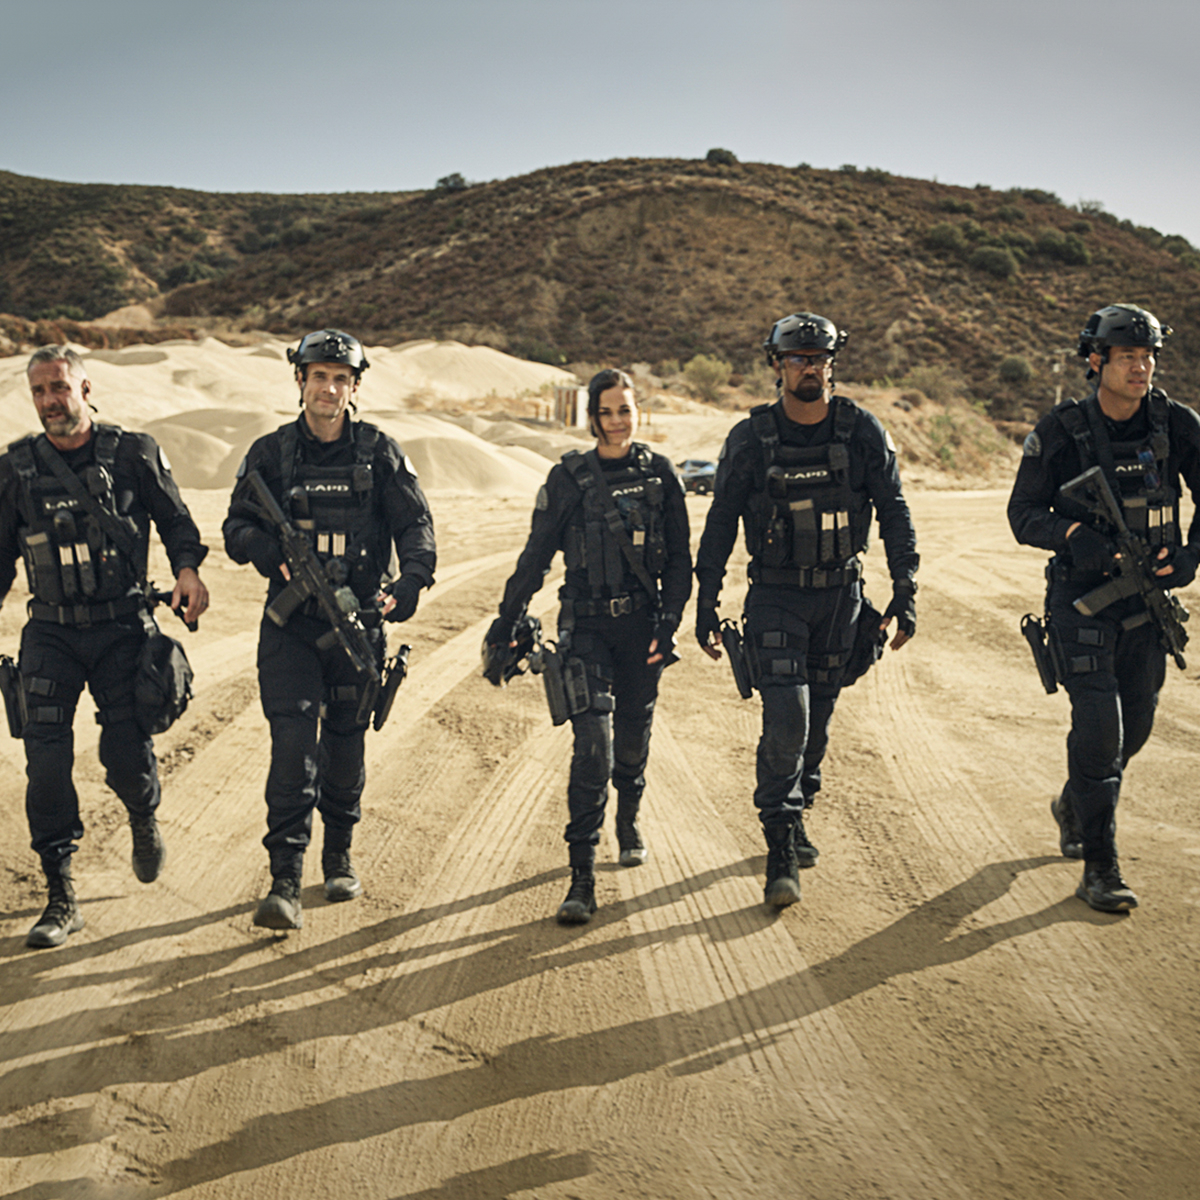 This S.W.A.T. Original Cast Member Will Not Return for Season 6